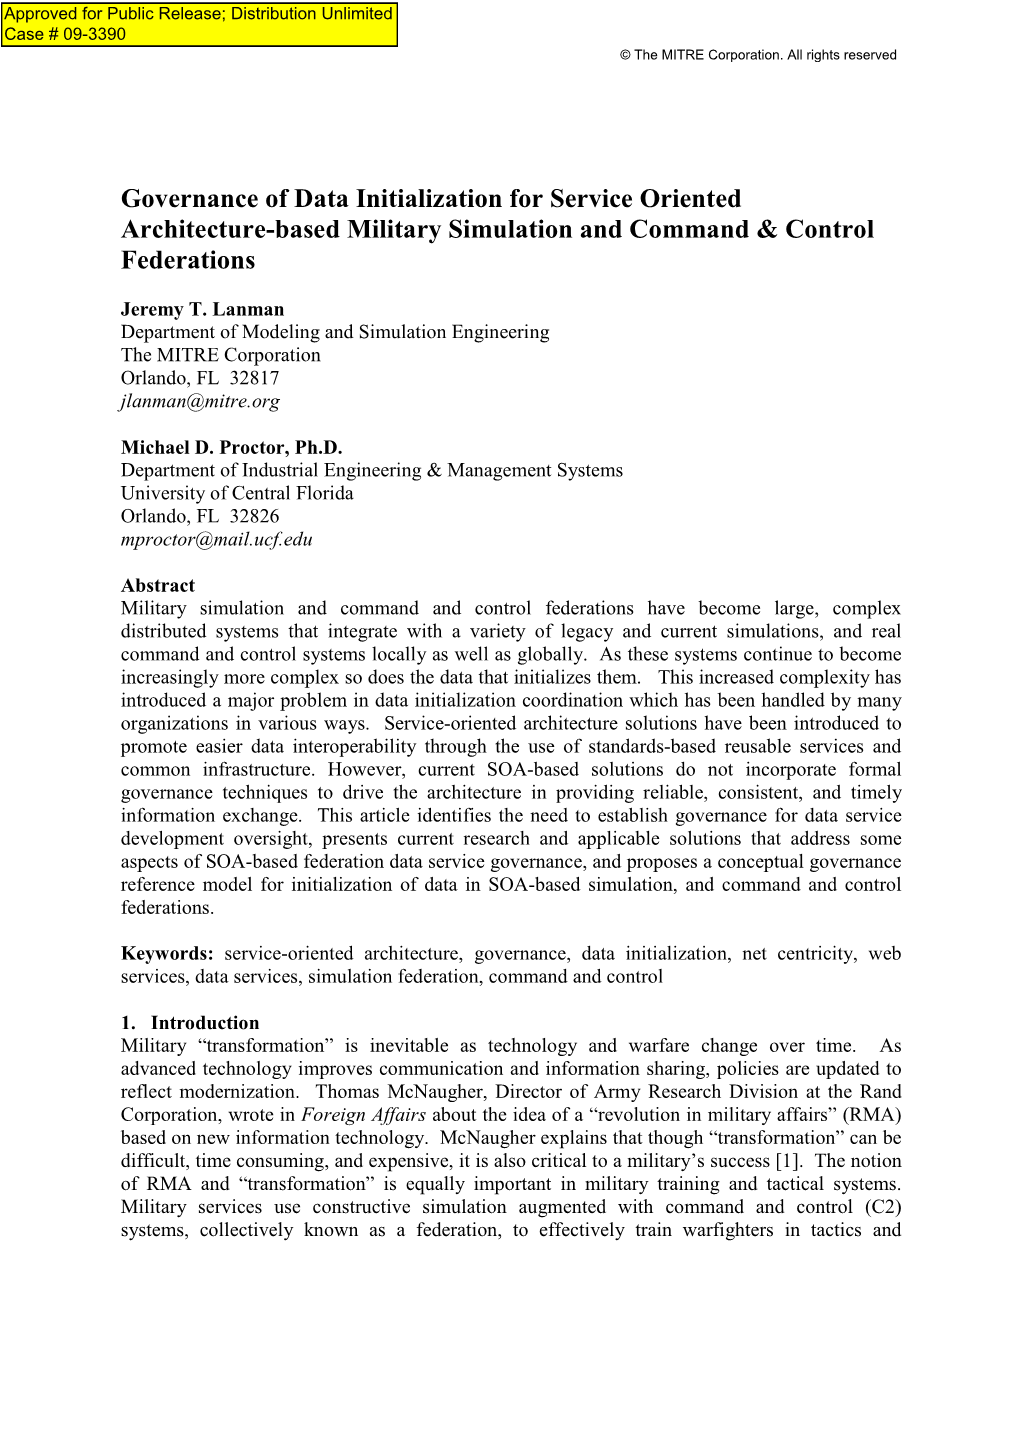 Governance of Data Initialization for Service Oriented Architecture-Based Military Simulation and Command & Control Federations